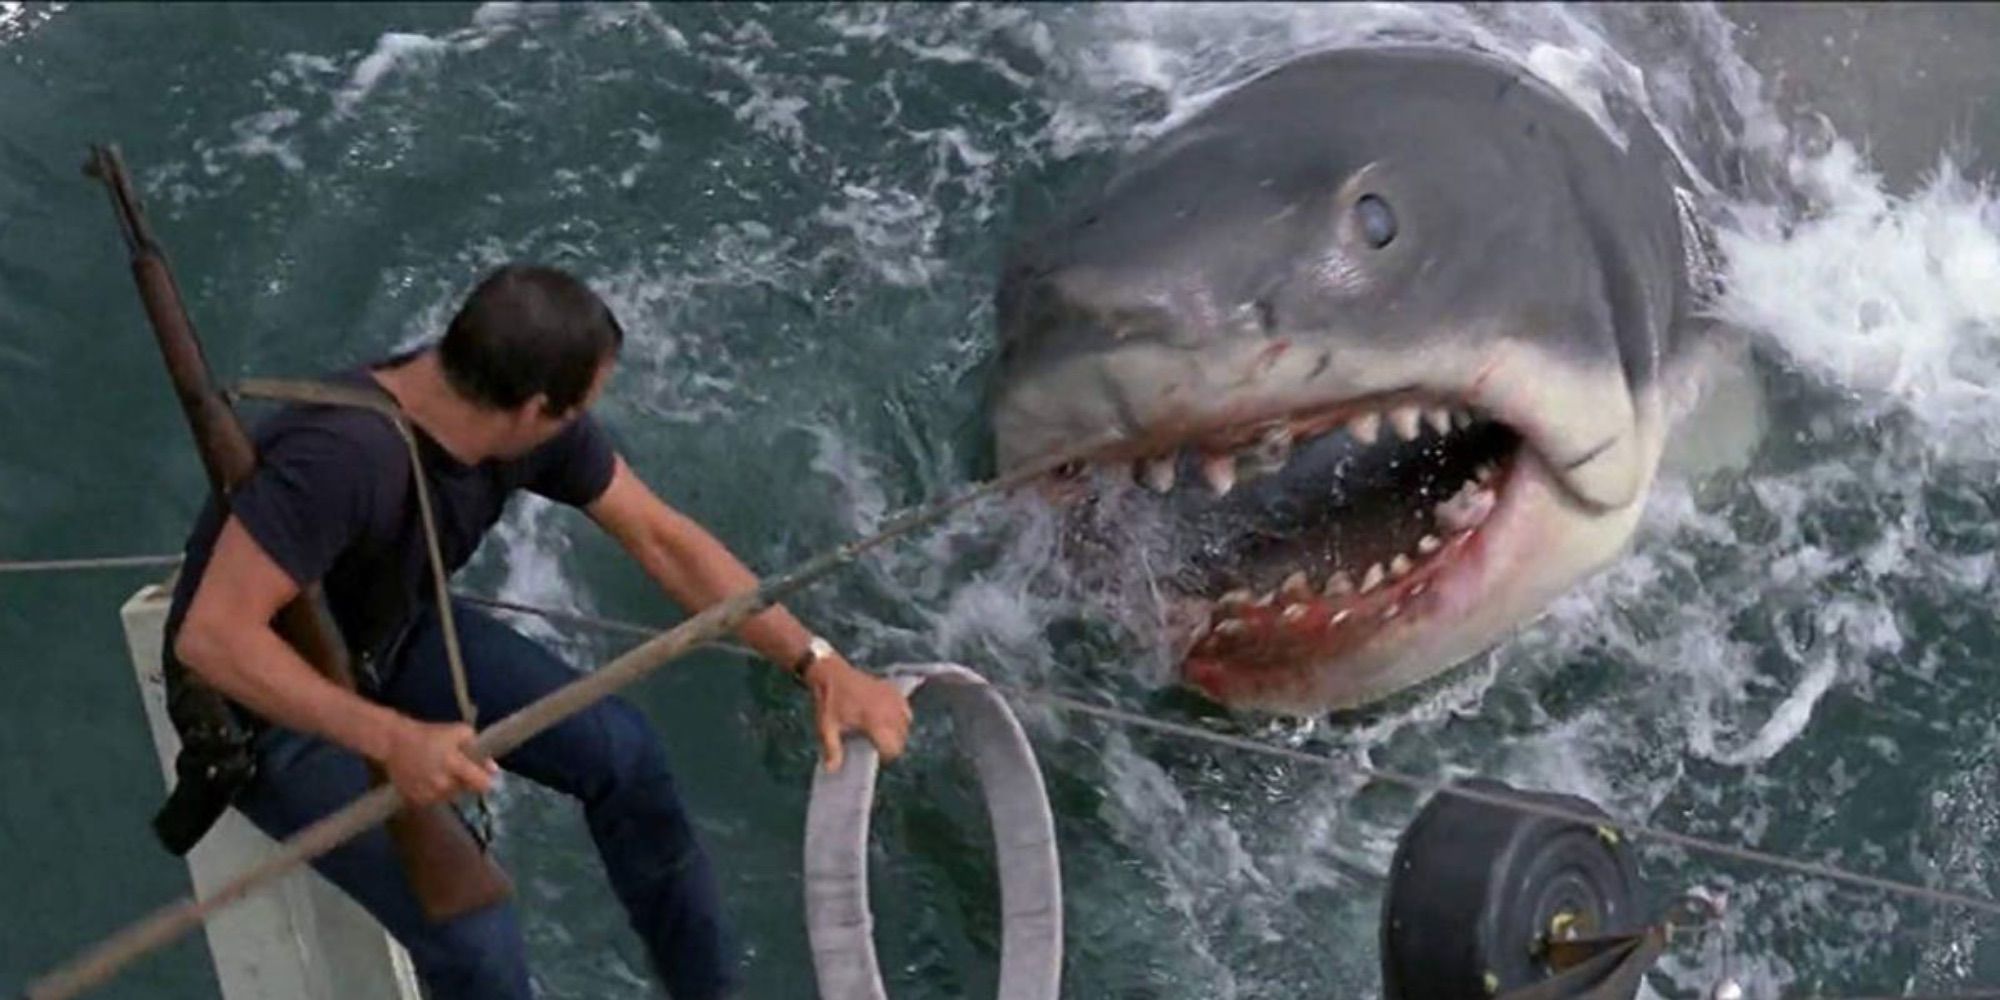 A man fighting with a great white shark